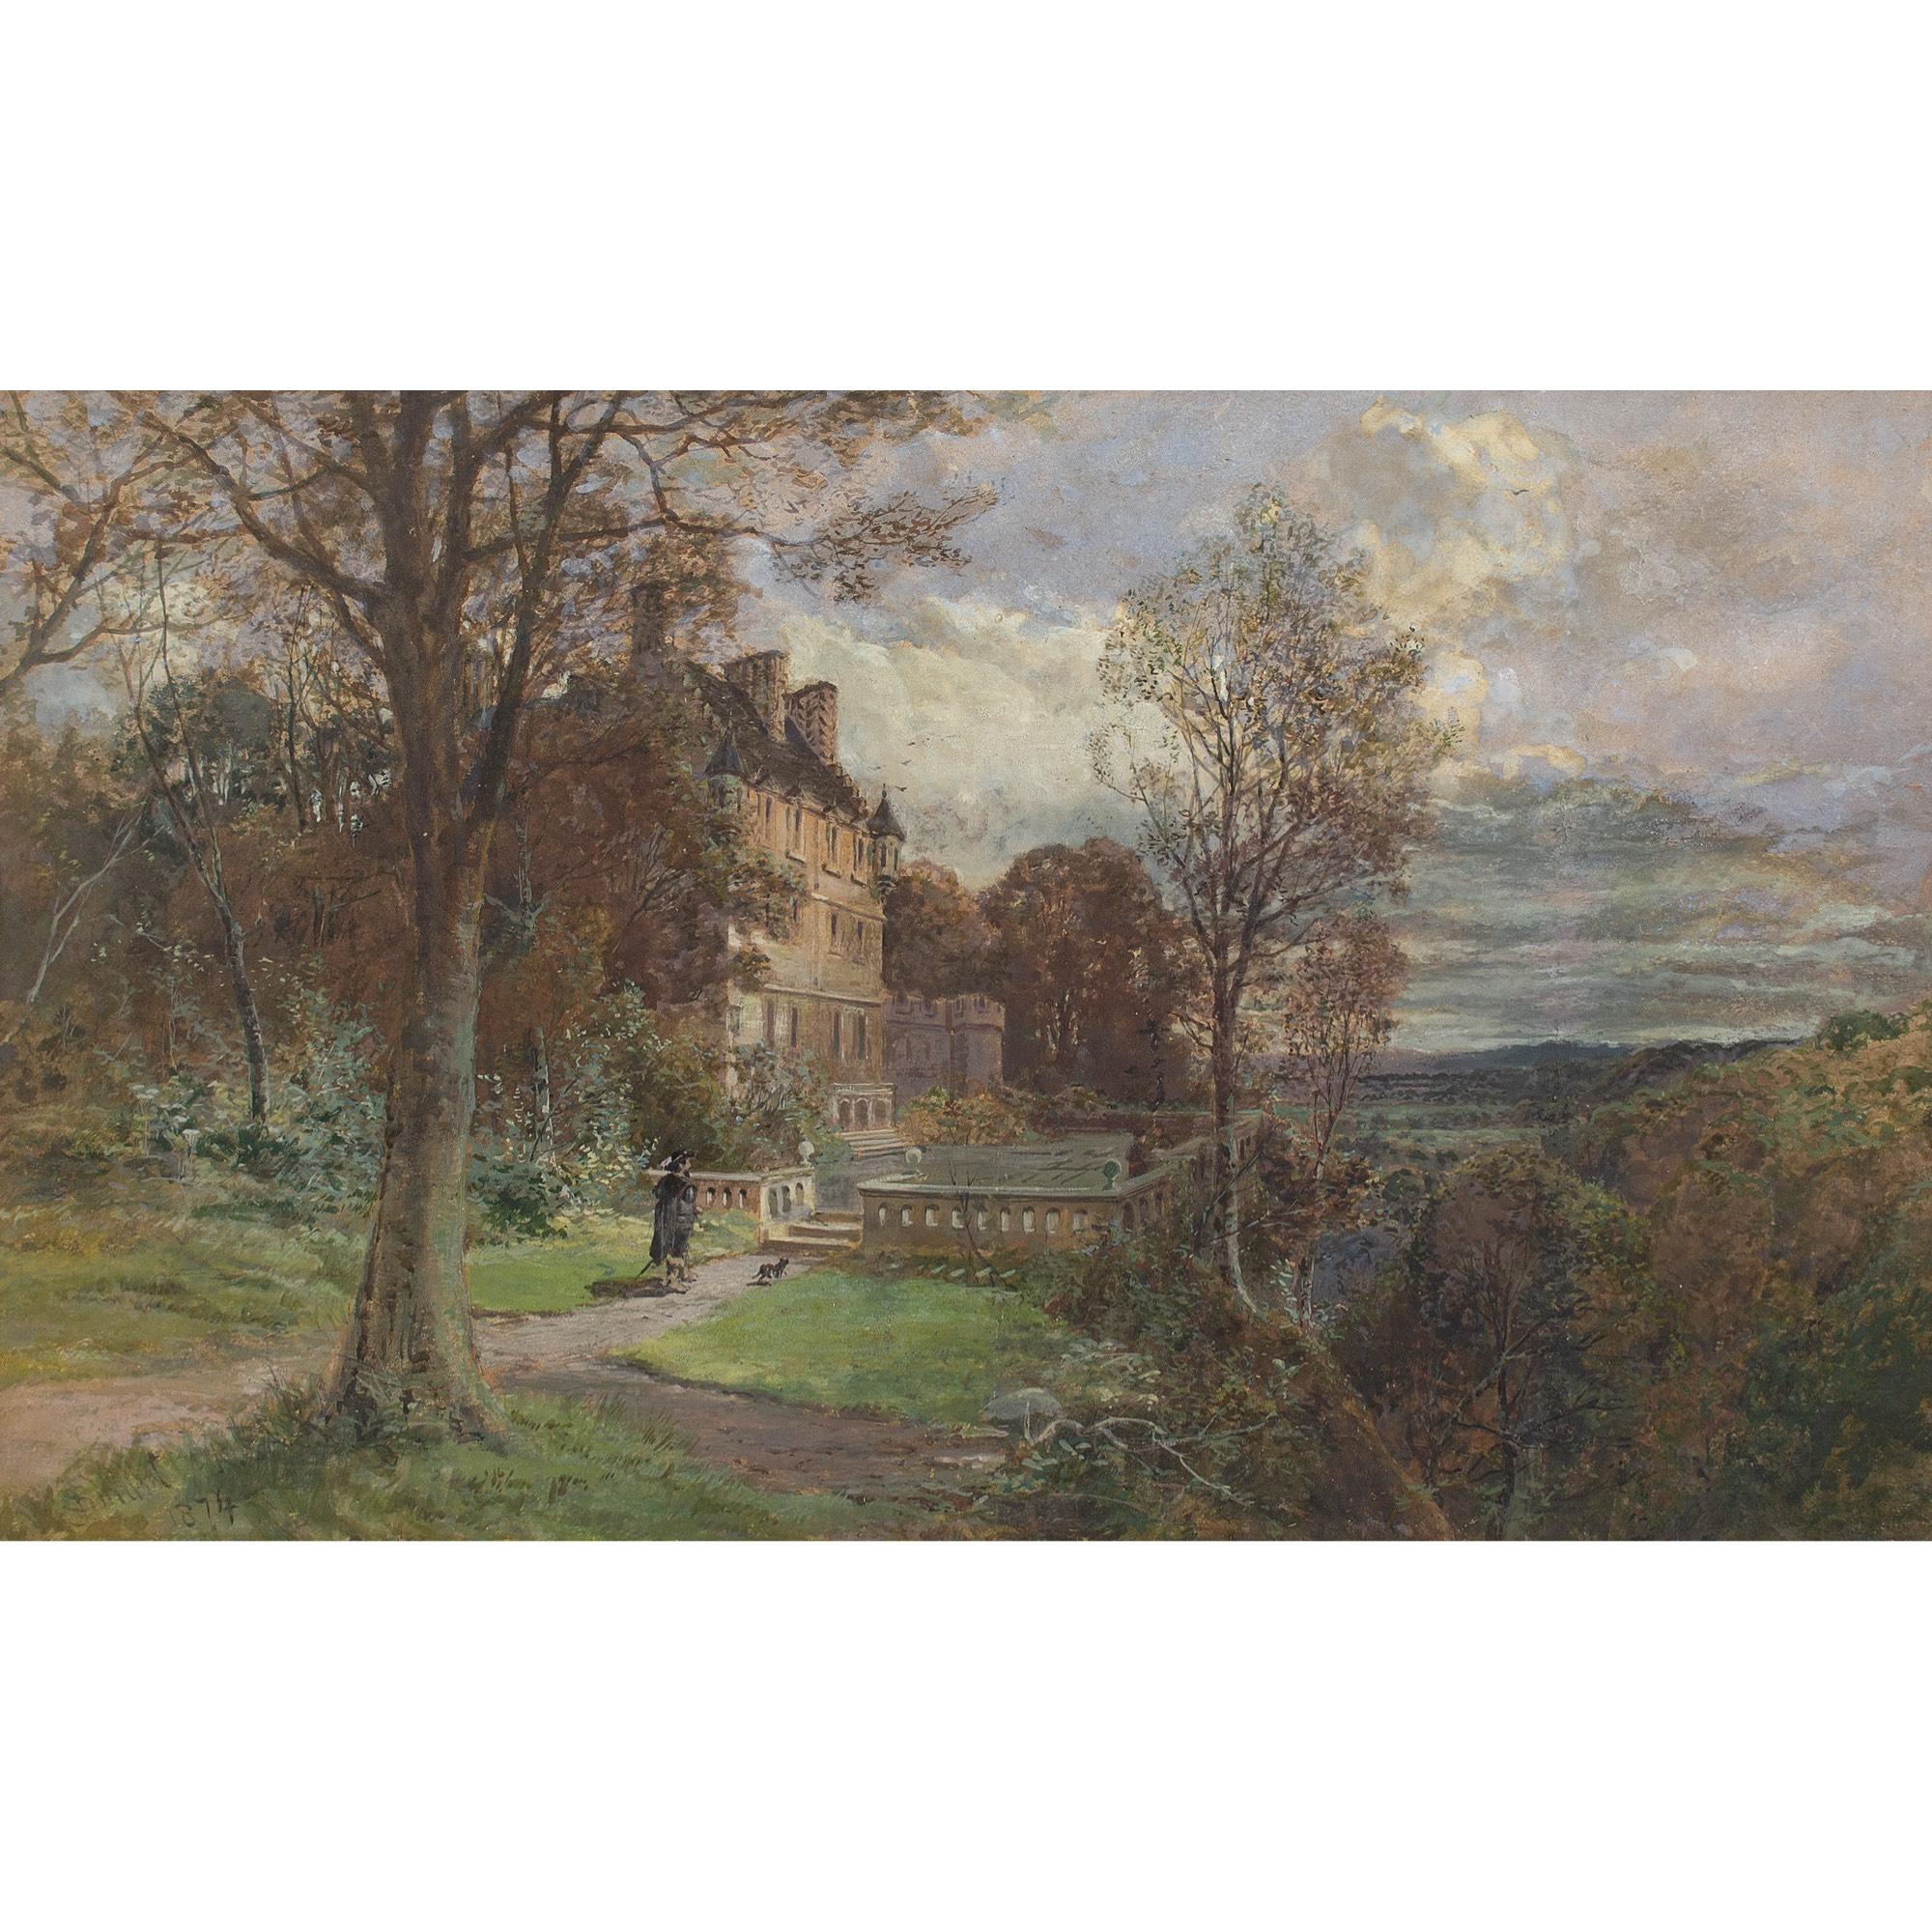 John Smart RSA RSW, The Grounds Of A Scottish Baronial Mansion, Watercolour For Sale 1